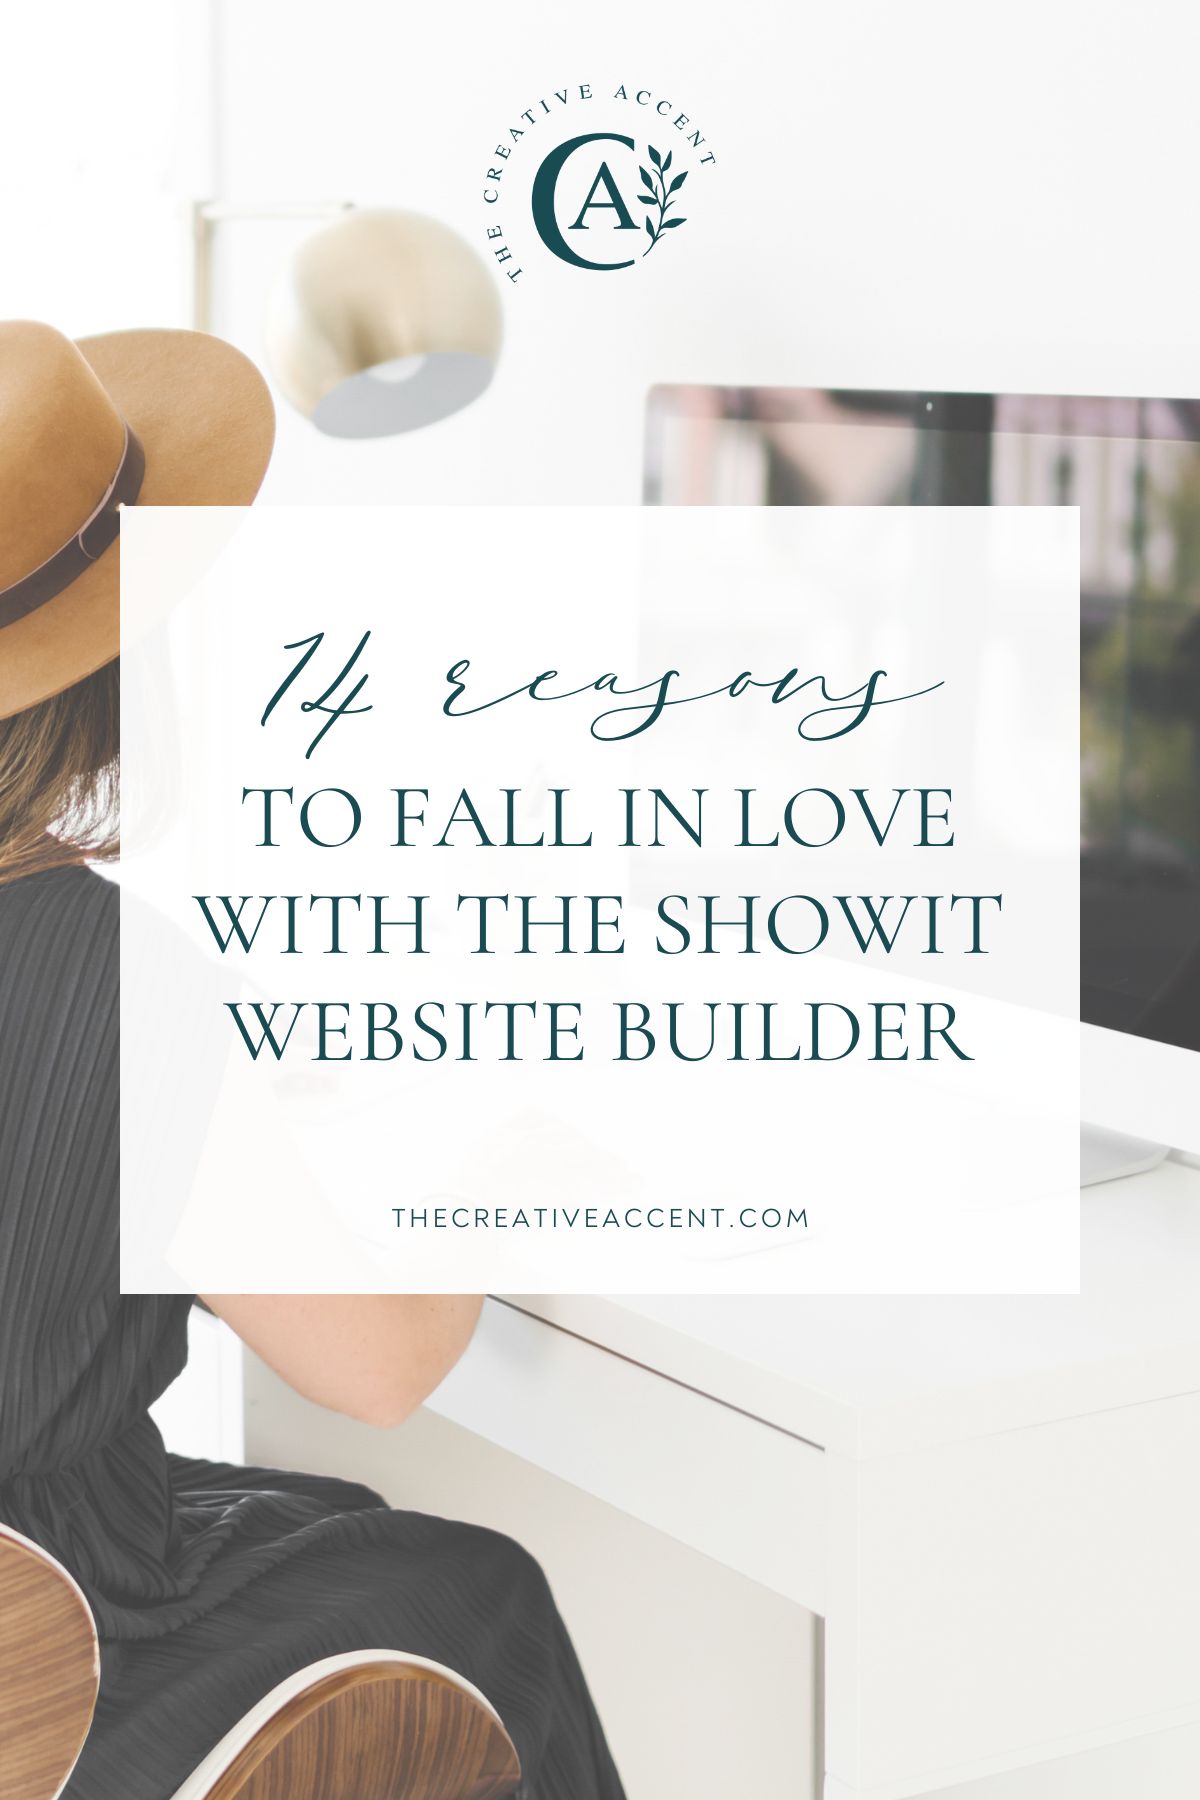 14 reasons to love the Showit website builder